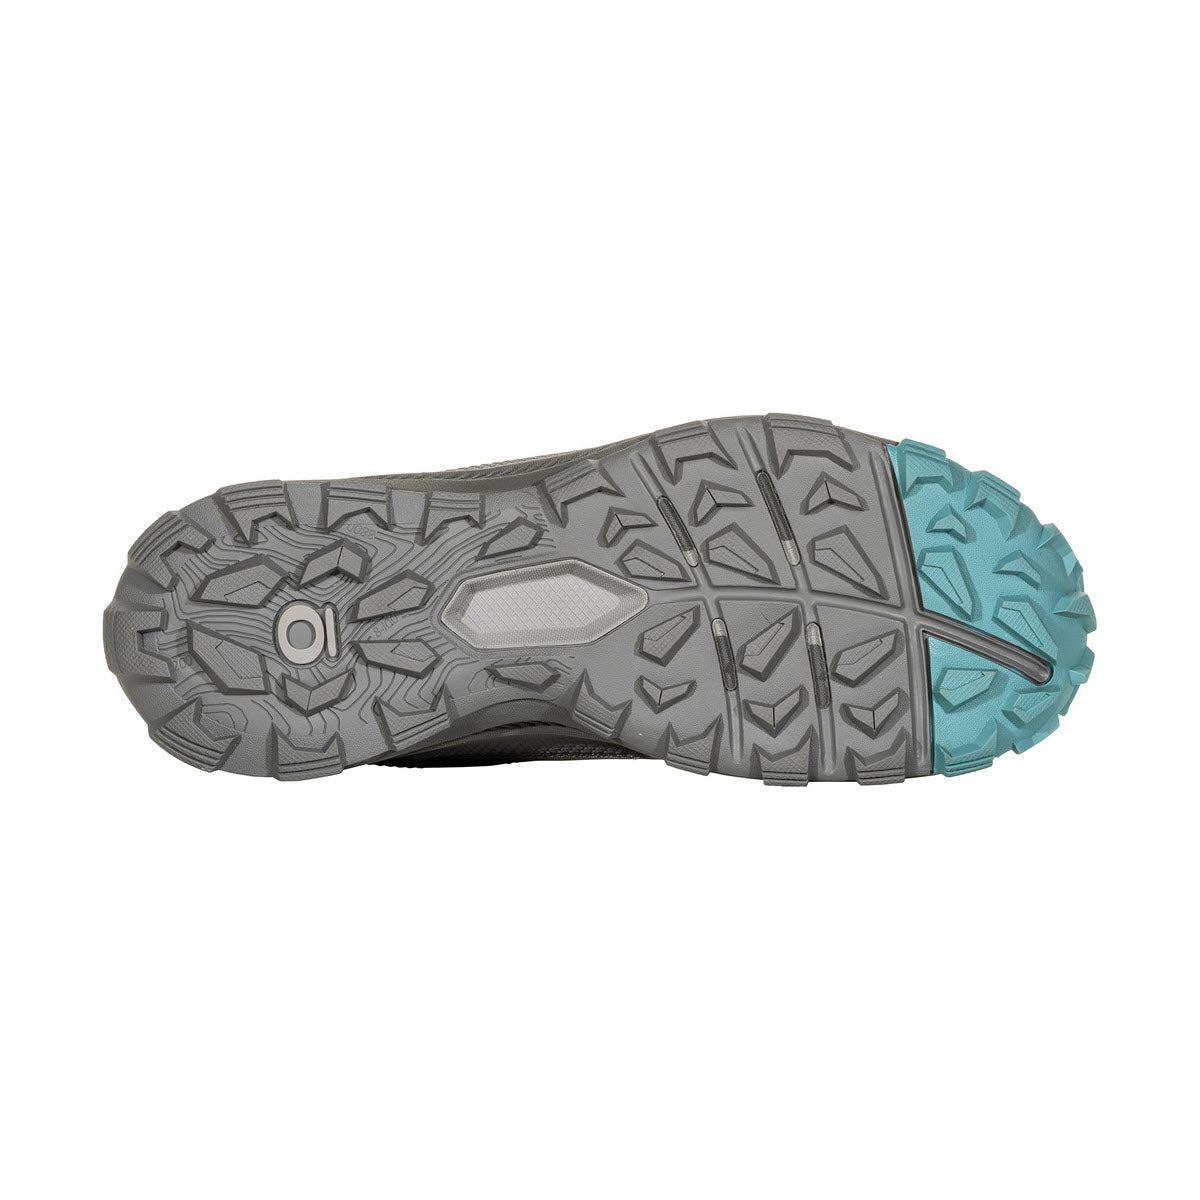 B-DRY waterproof tread pattern on the sole of a hiking shoe with grey and blue accents, such as the OBOZ KATABATIC LOW B-DRY ISLAND - WOMENS by Oboz.